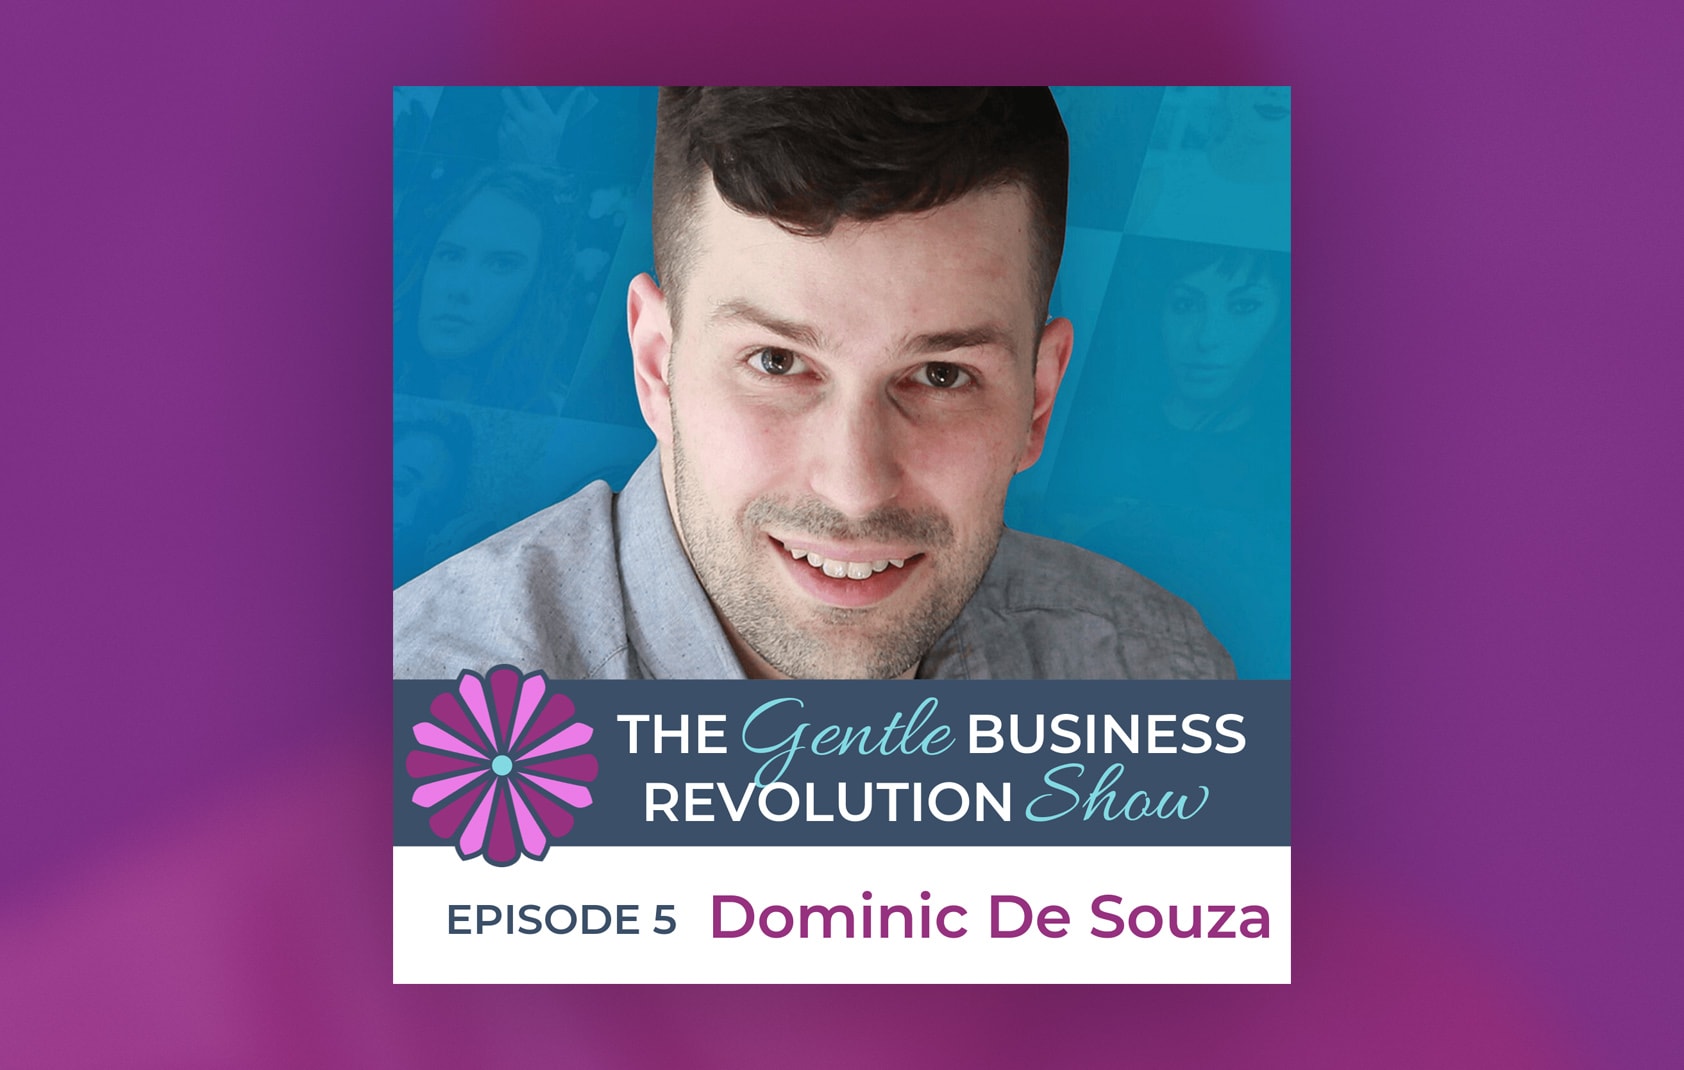 Marketing to Connect Through Story – Interview with Sarah Santacroce on ‘The Gentle Business Revolution’